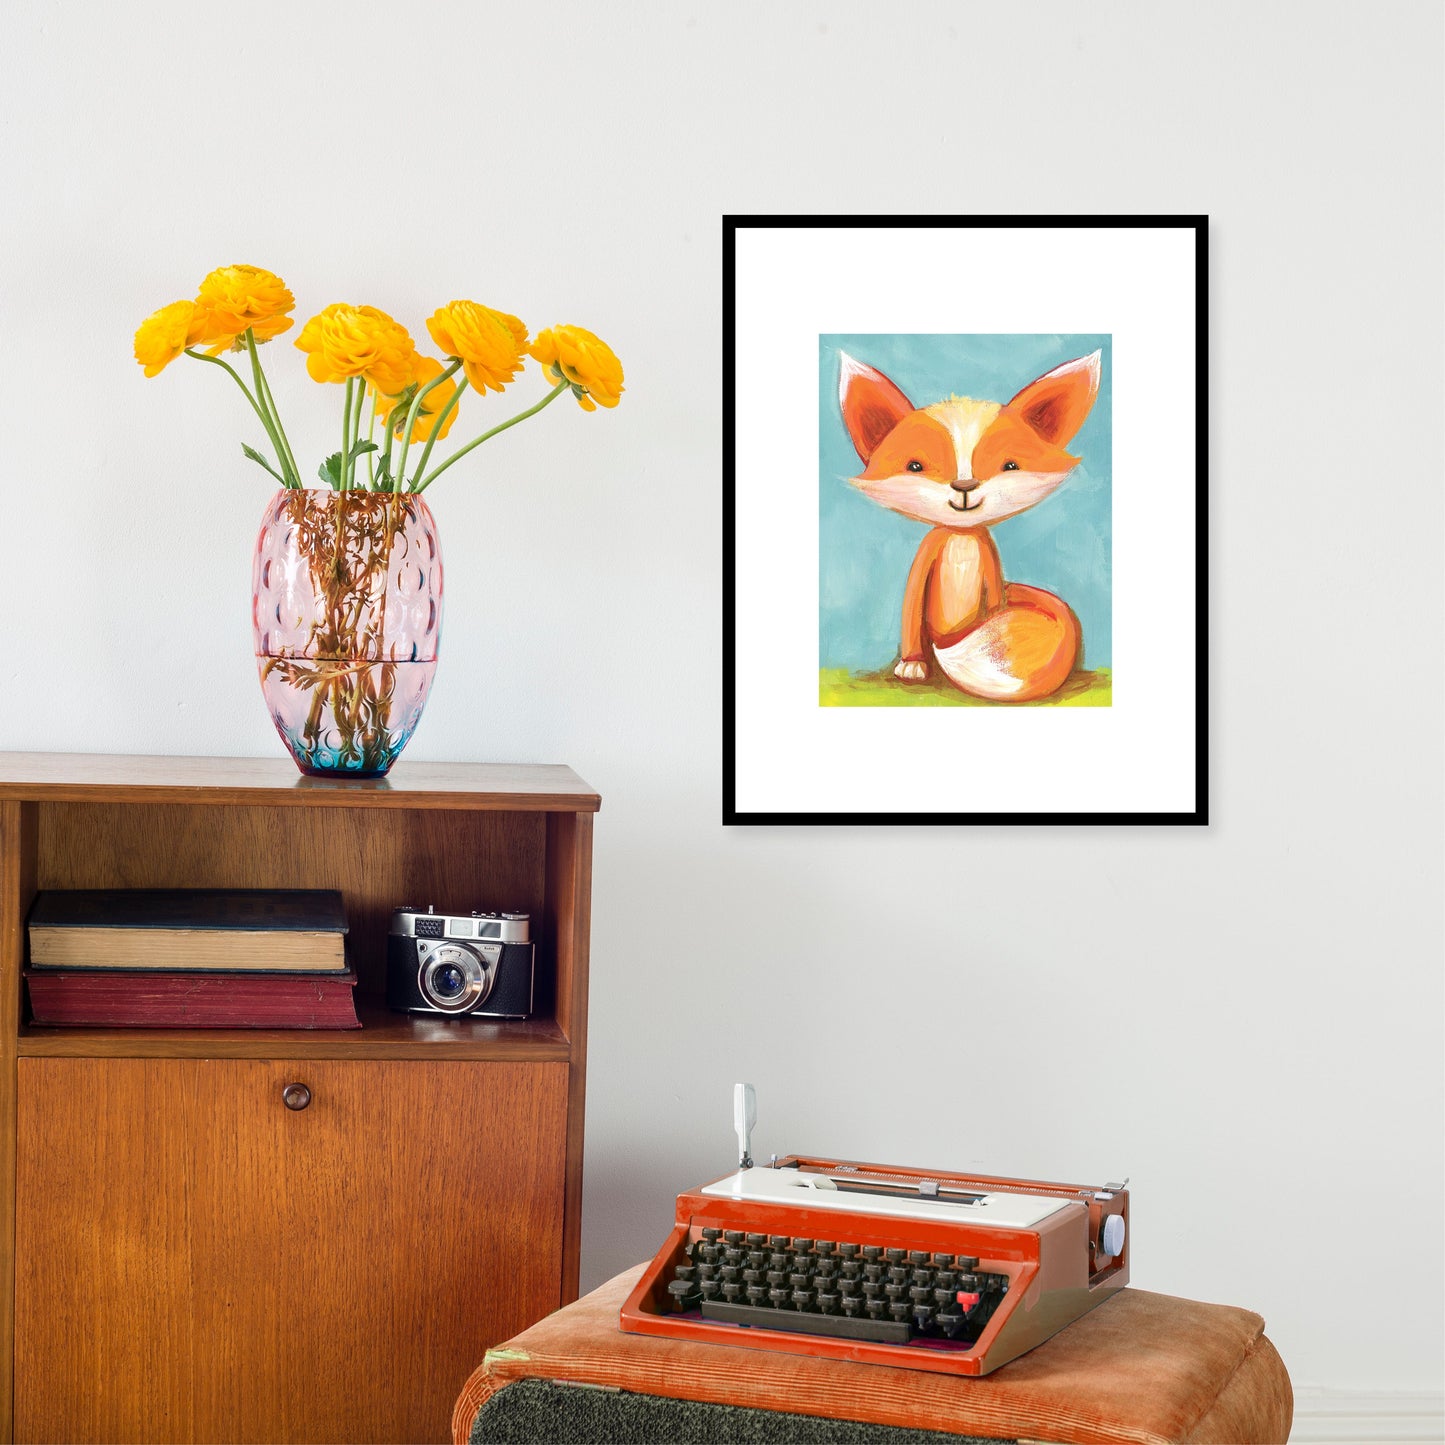 ART PRINT - Little Red Fox Giclee PRINT in various sizes featuring original art by Adriana Bergstrom (Adriprints)